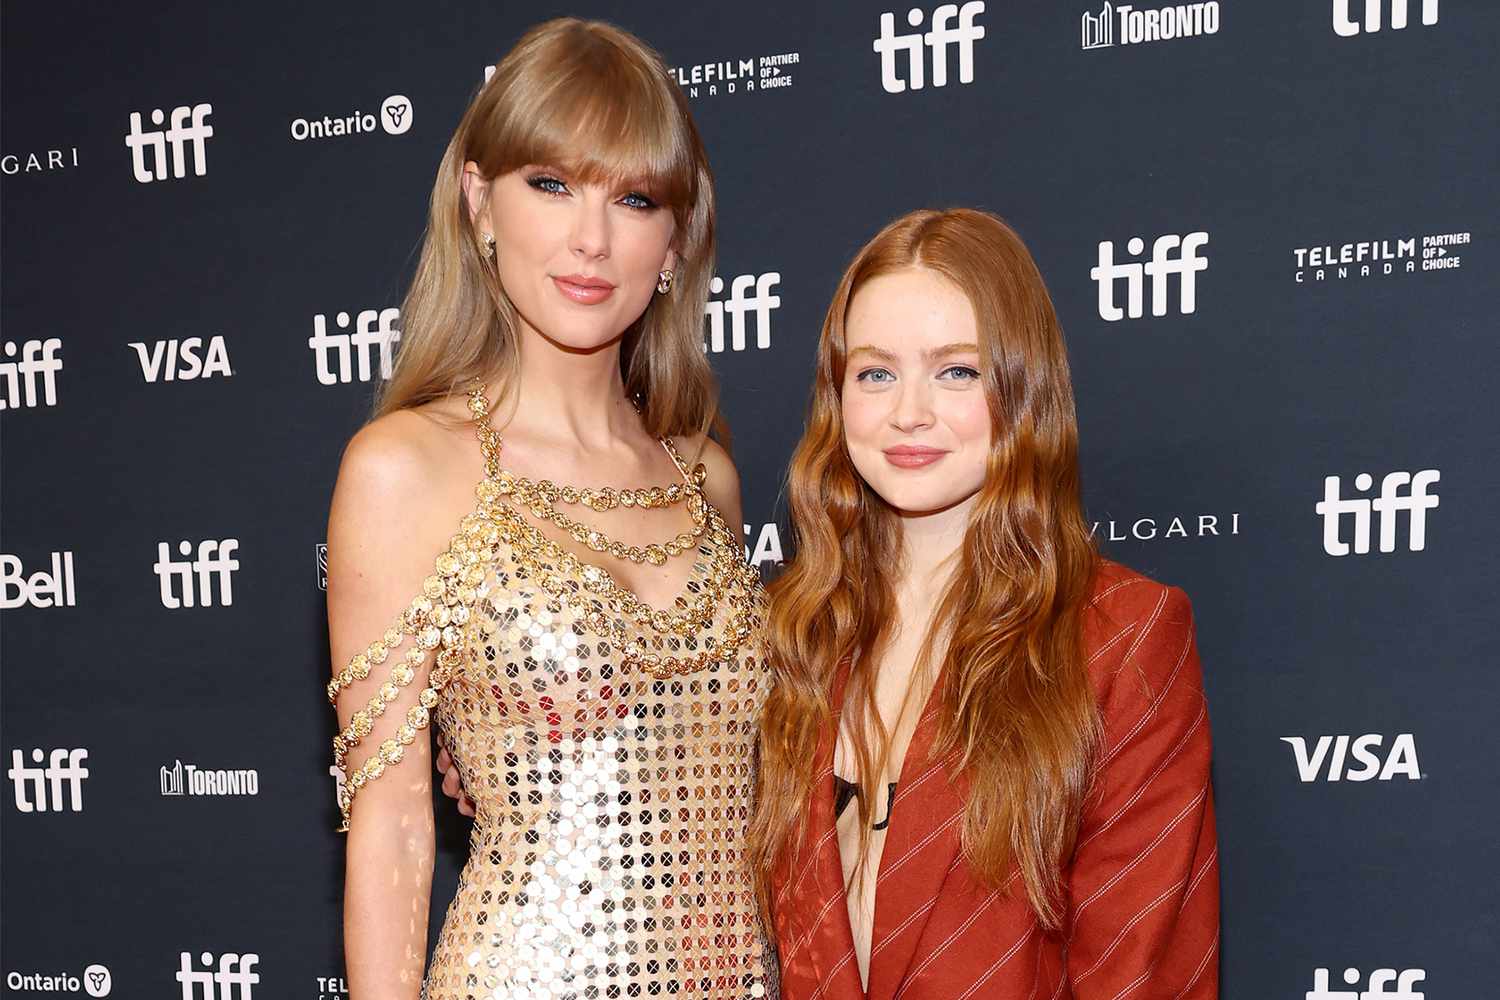 Why Sadie Sink was shocked that Dylan O'Brien kitchen fight scene made Taylor Swift's 'All Too Well' video